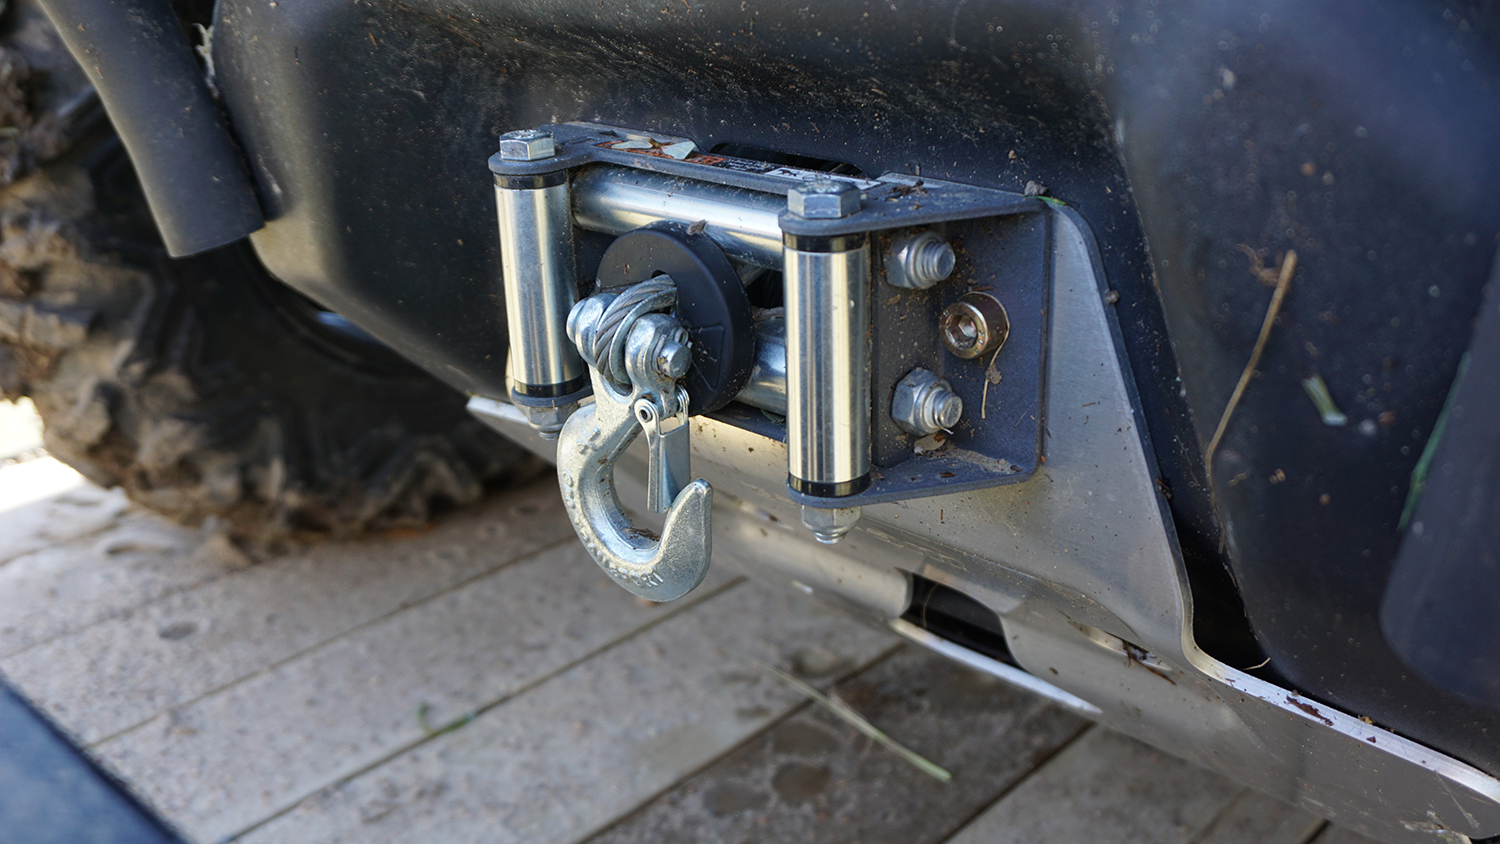 ATVs: Three Keys to Keep Your Winch Running Properly